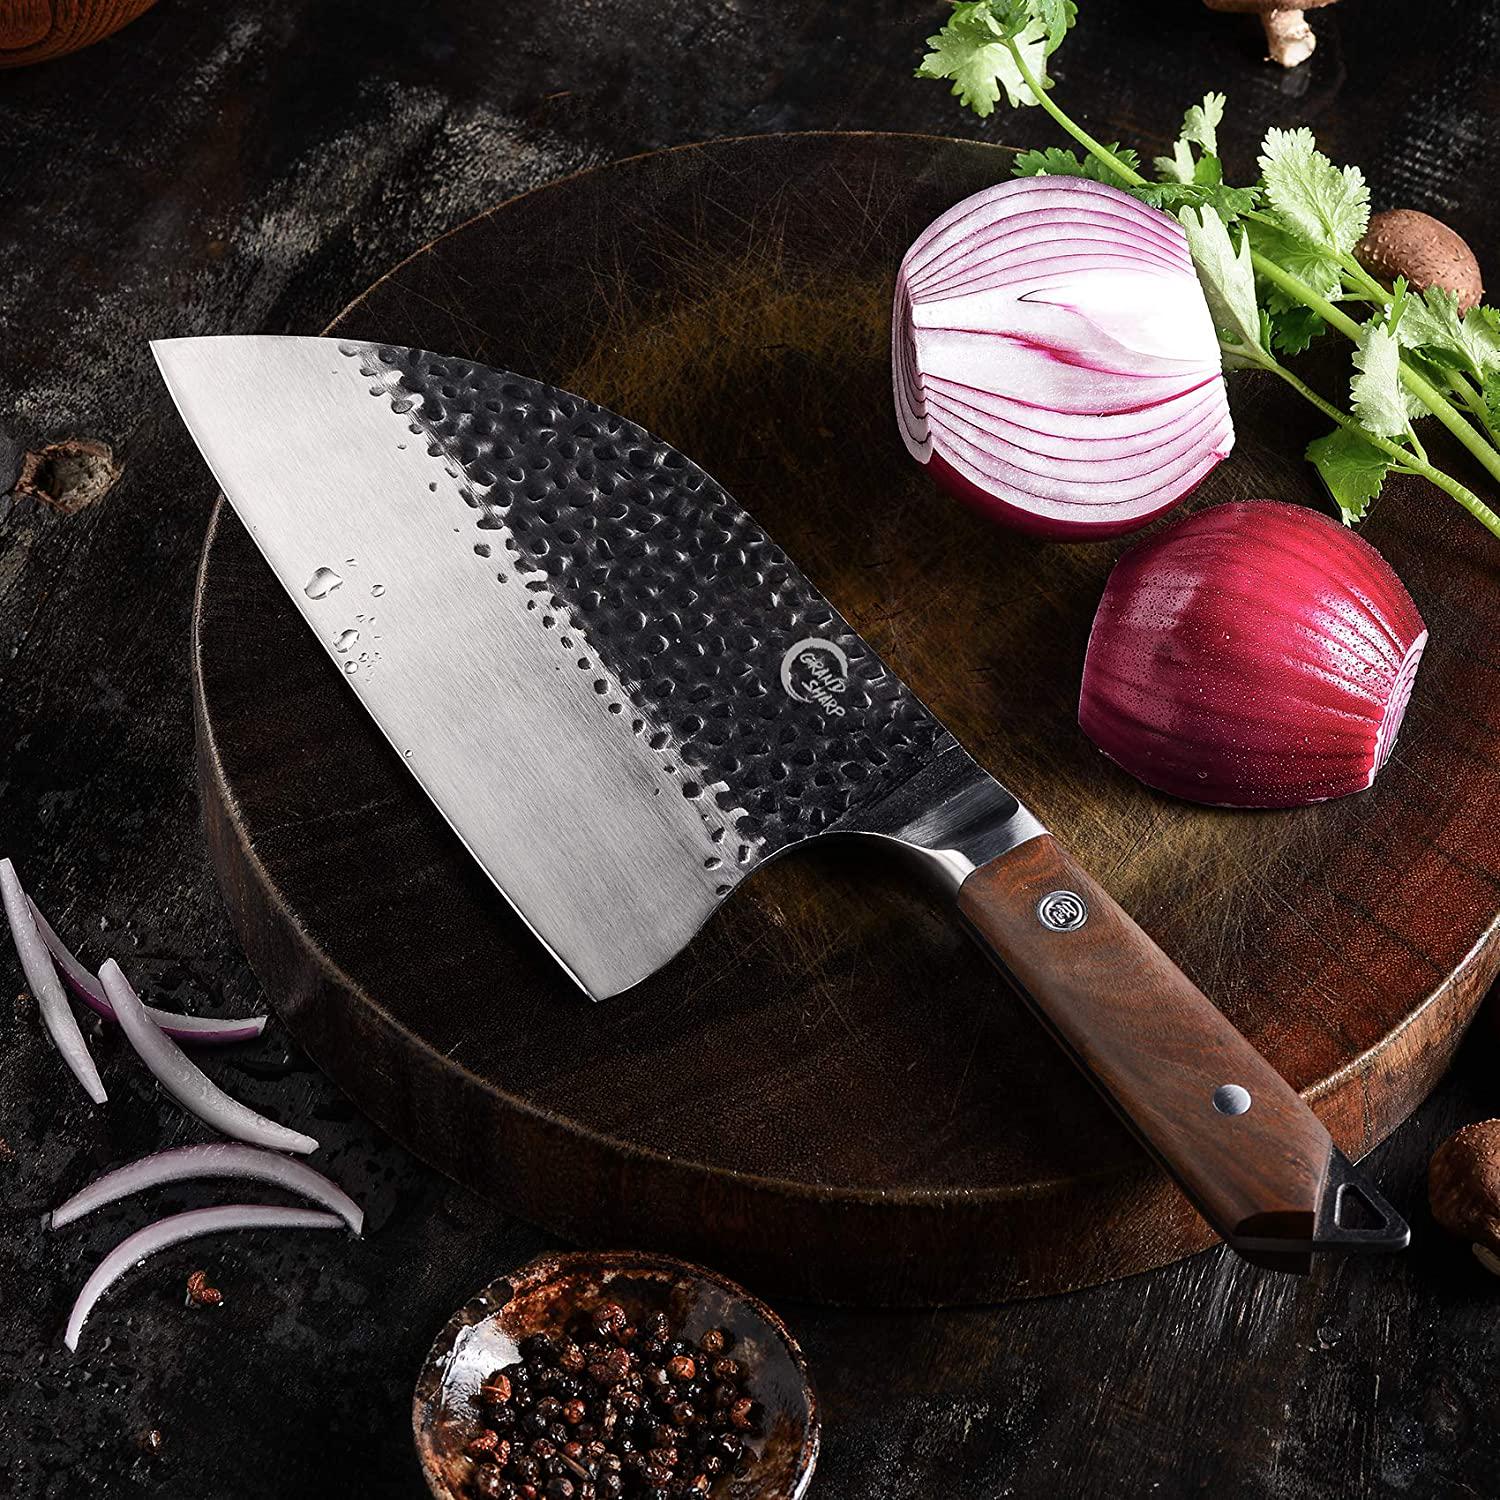 GRAND SHARP, [Full Tang]Butcher Knife Handmade Forged Kitchen Chef Knife Grandsharp Pro Razor Sharp Serbian Clad Steel Meat Vegetable Chopping Cutting Cleaver with Leather Knife Sheath